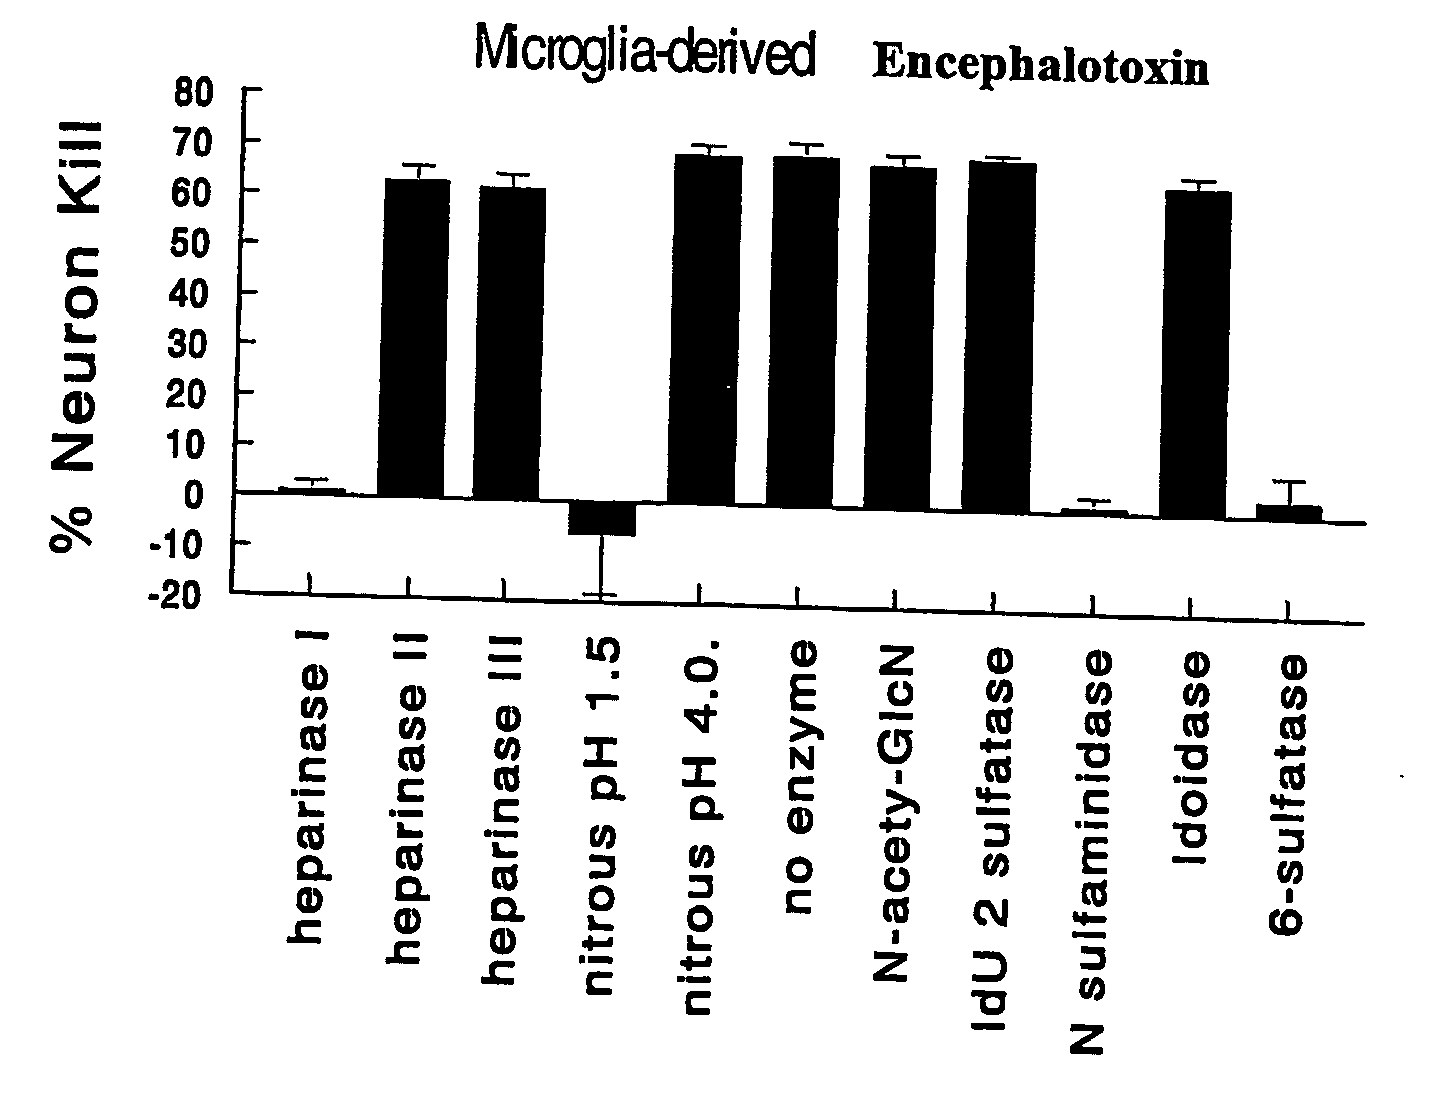 Methods for diagnosis and monitoring of neurological disease by detection of an Encephalotoxin